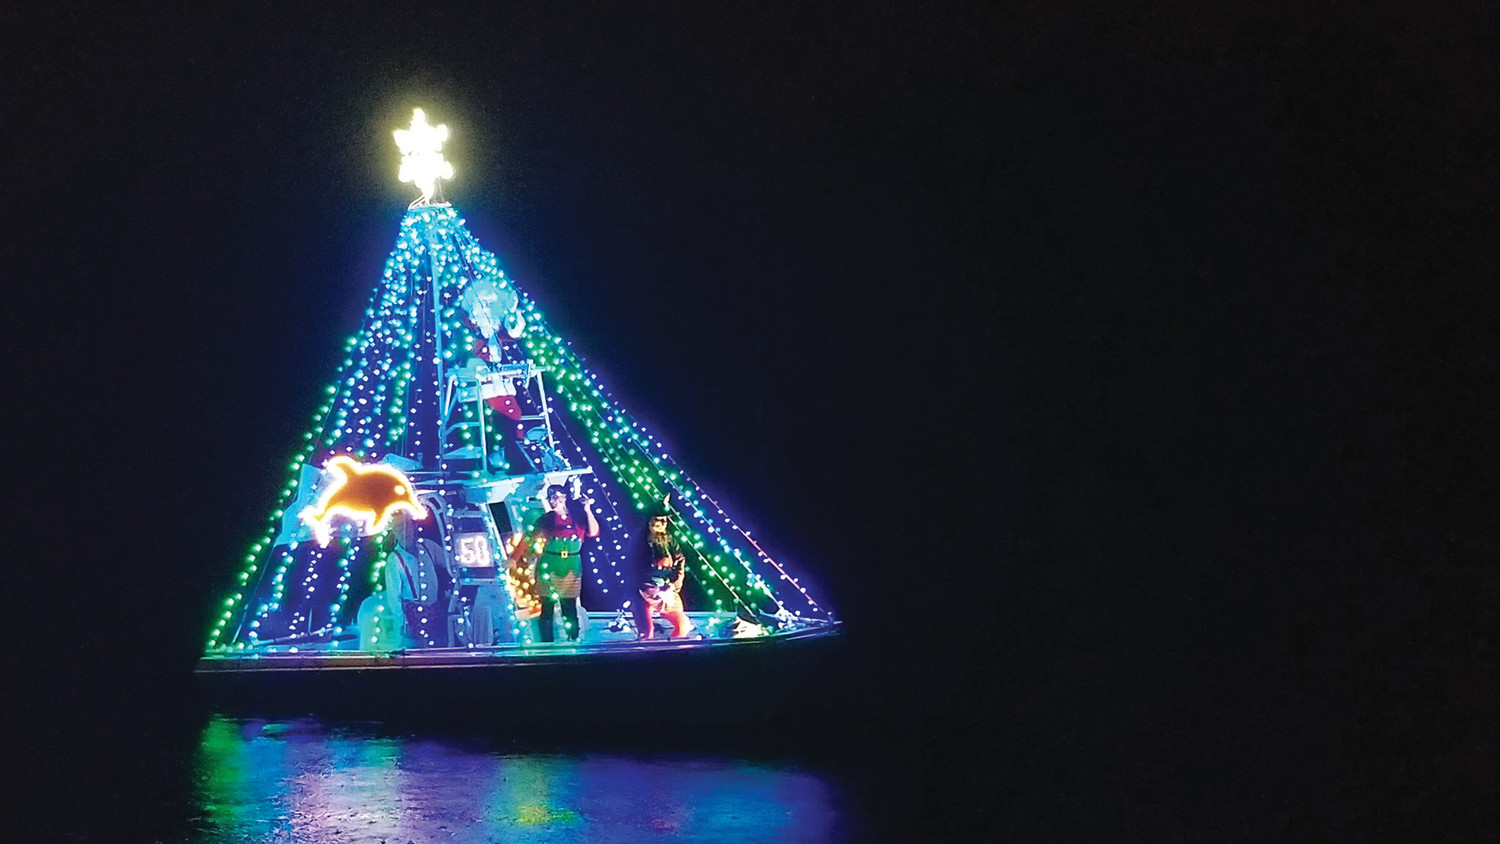 Palm Valley Boat Parade tradition continues despite challenging weather